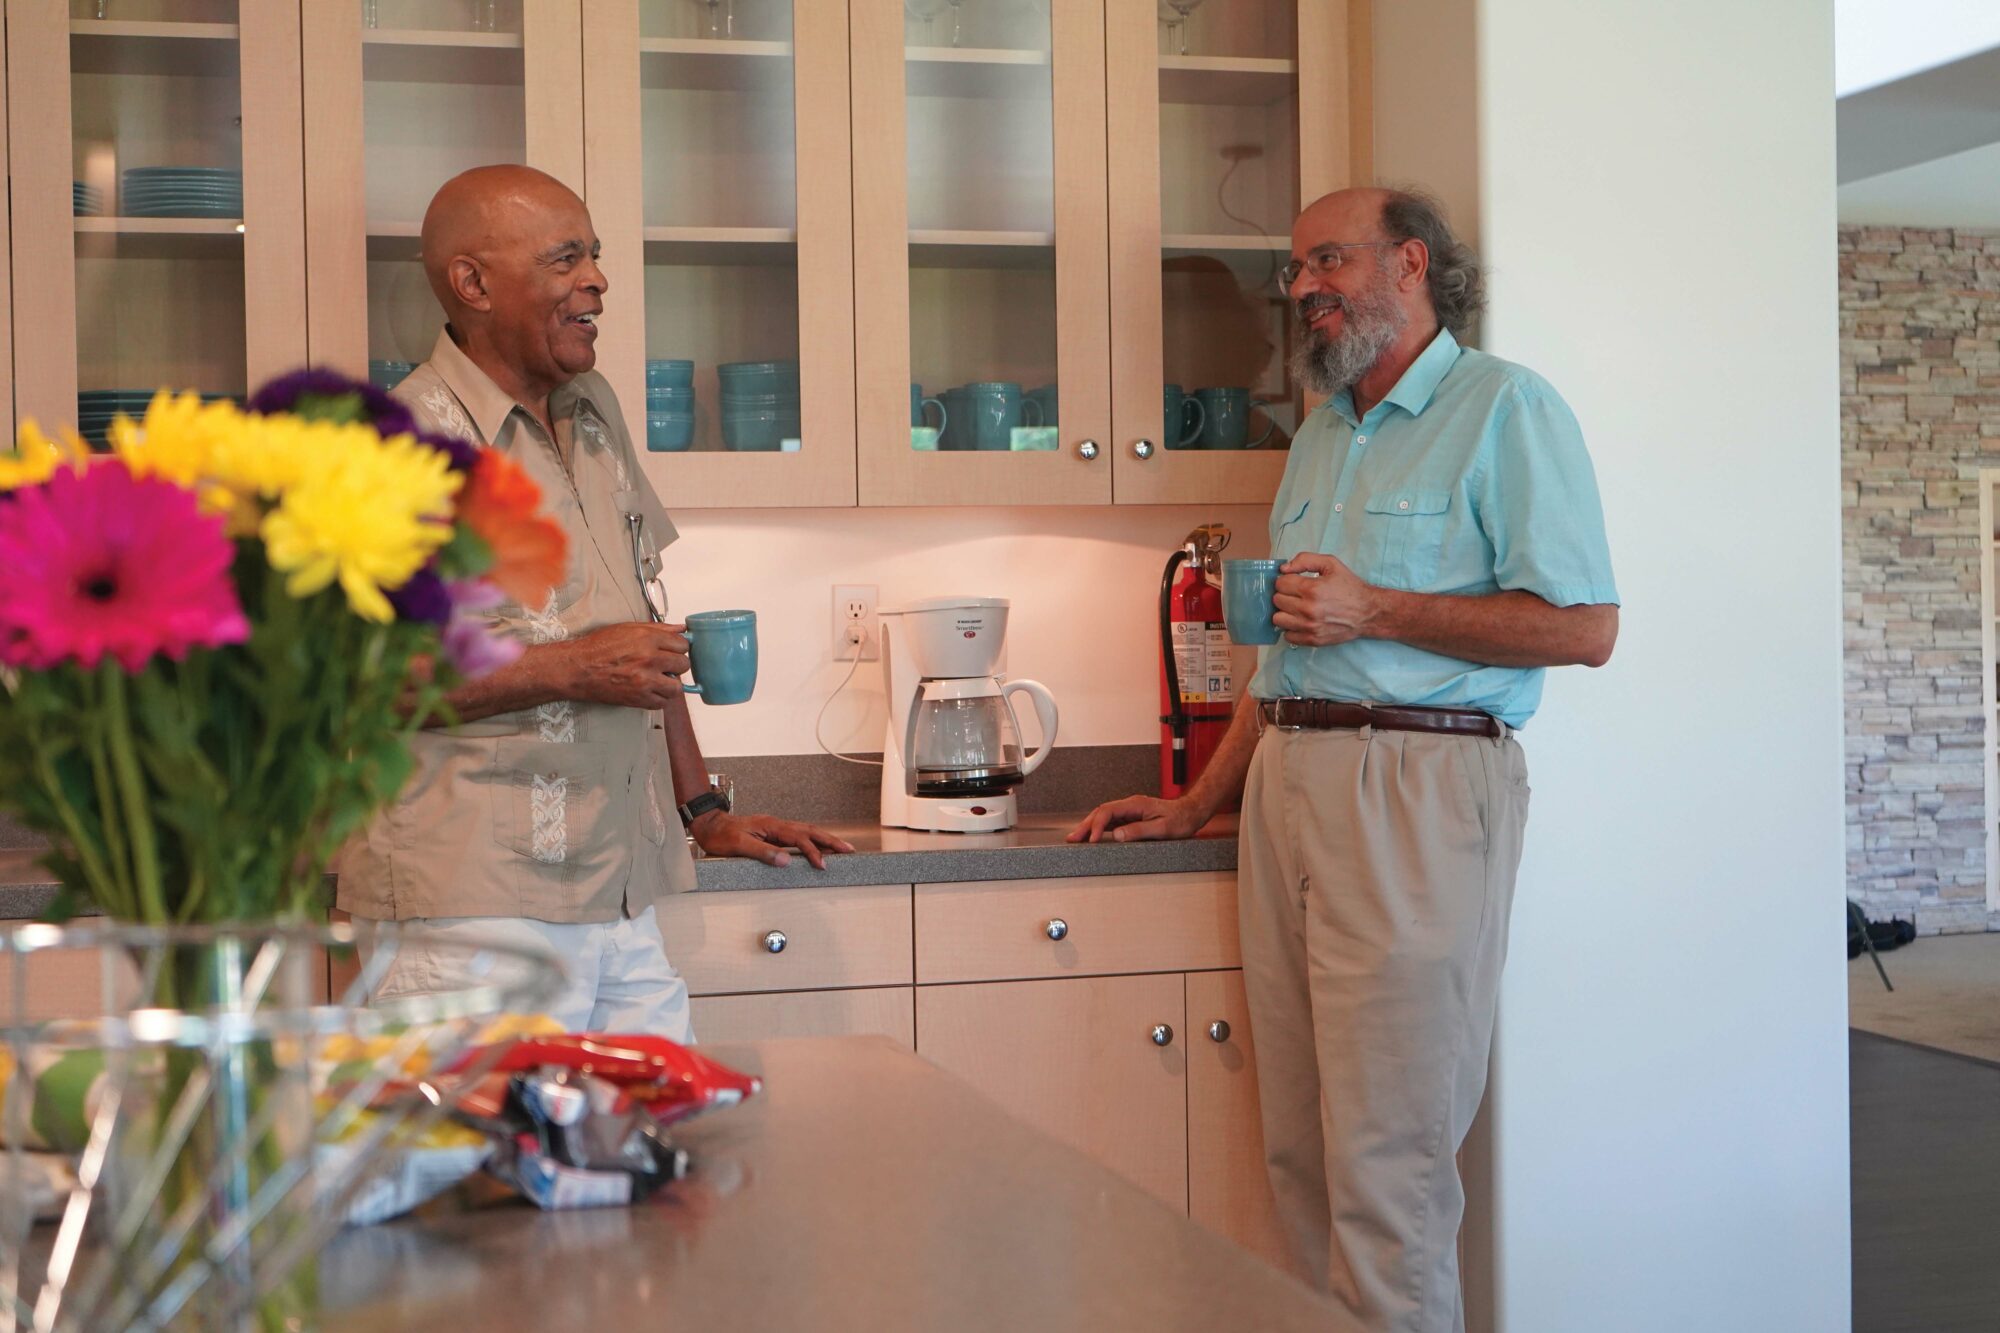 D anilo Manalansan and John Parcher in the Shared Housing residence in Covina